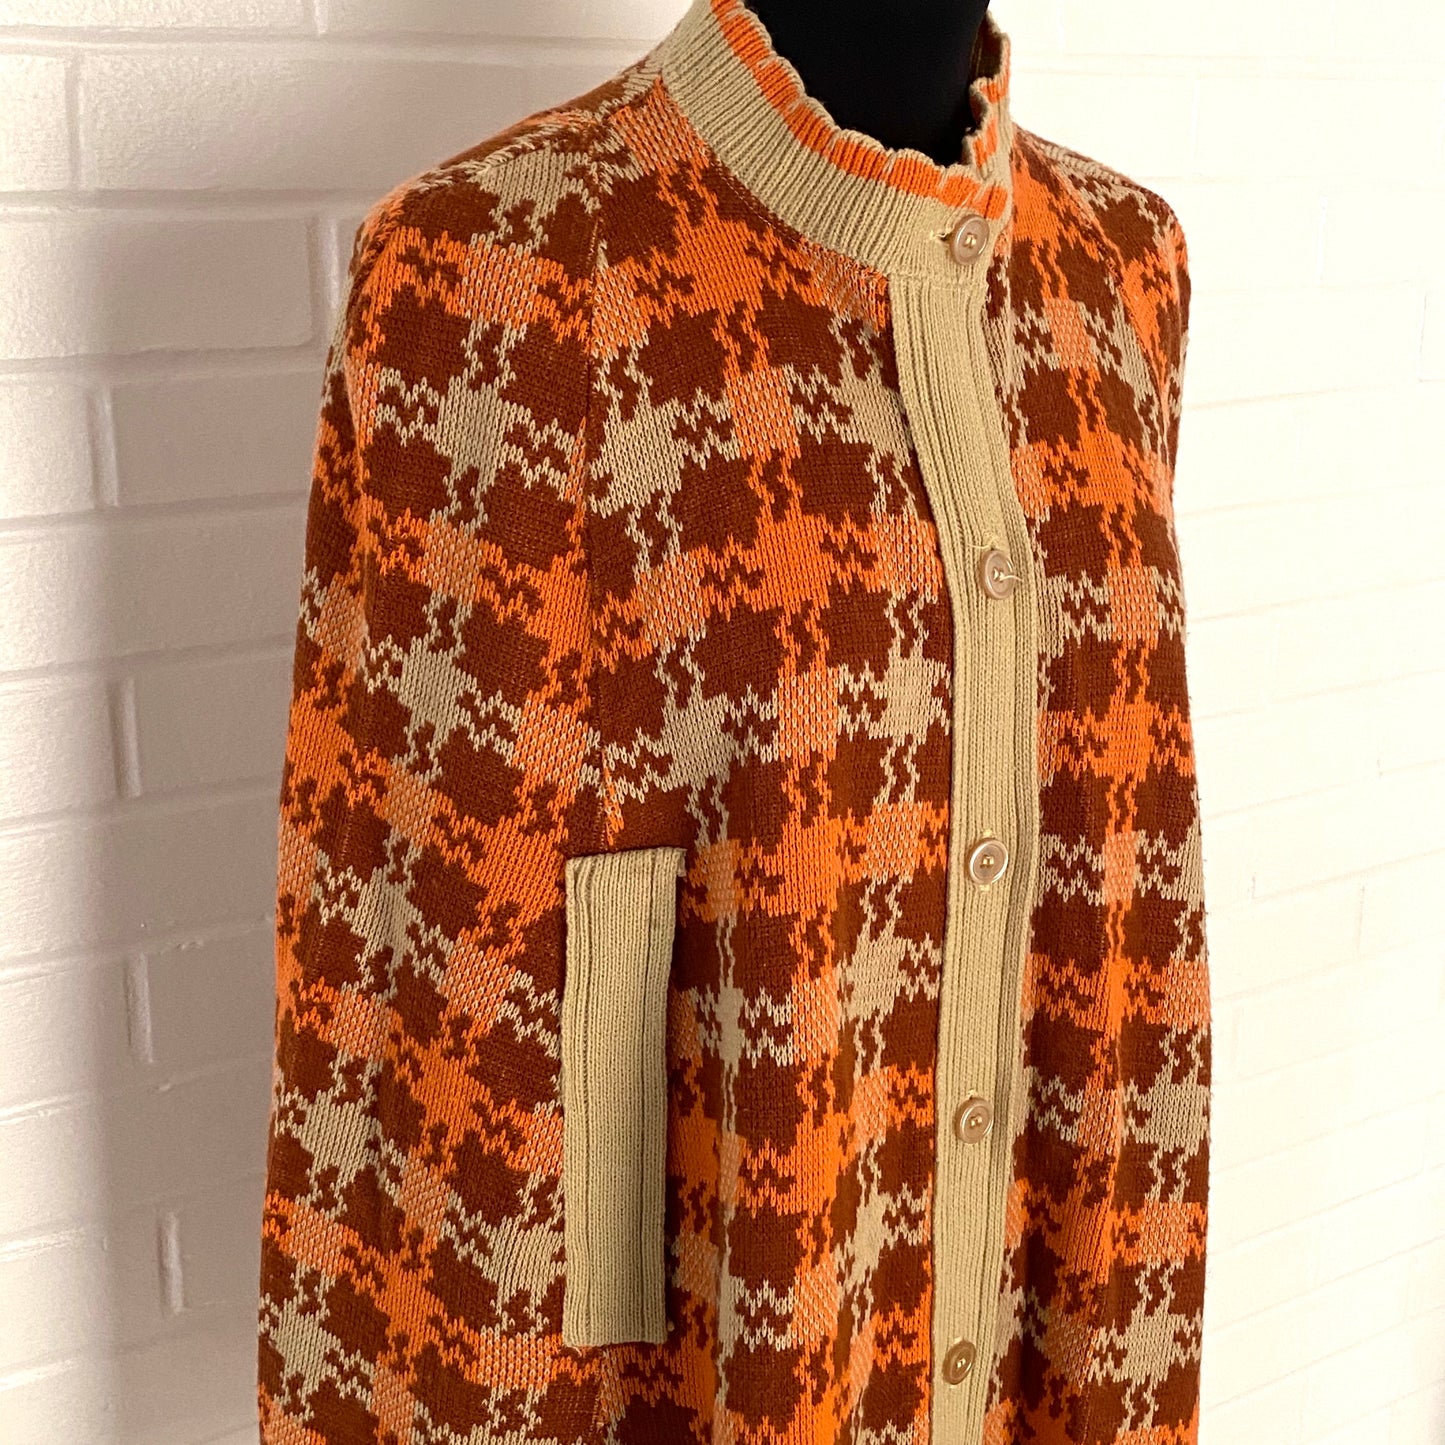 Late 50s/Early 60s Banff Sweater Capelet